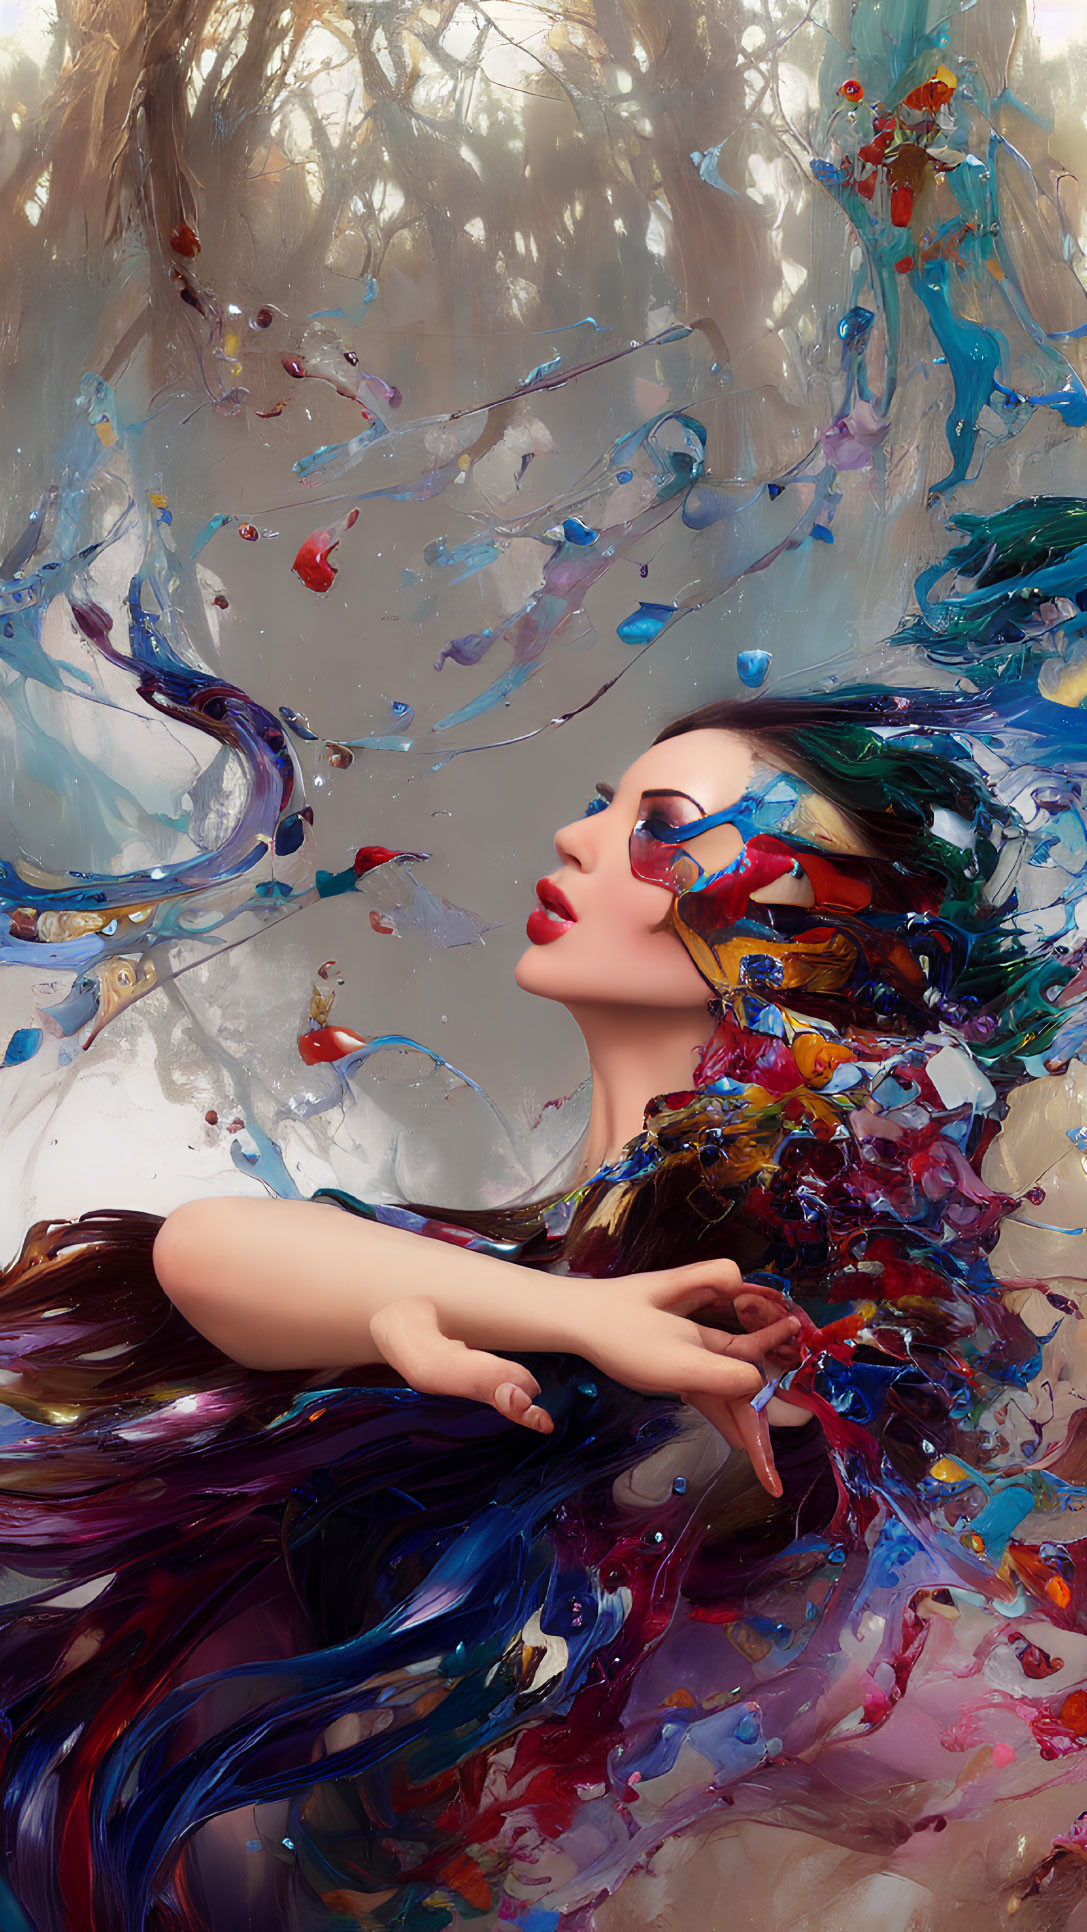 Vibrant portrait of woman with flowing hair and paint splashes